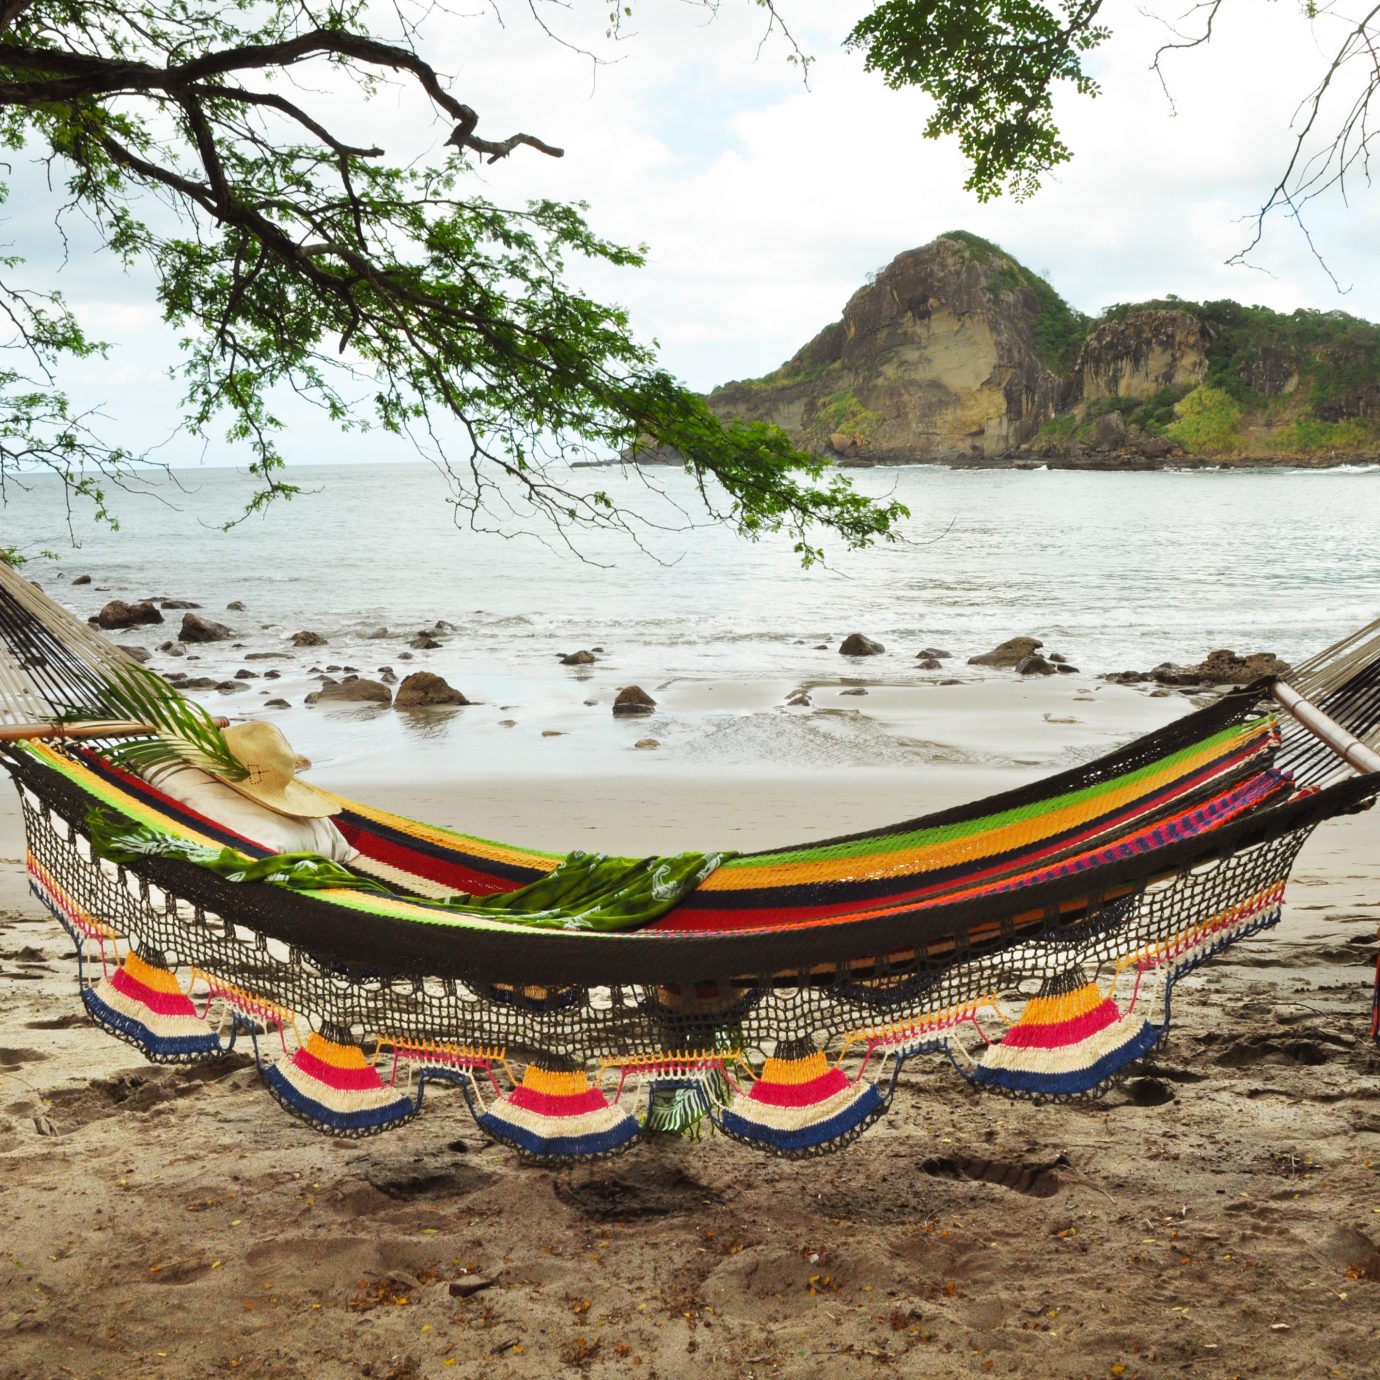 Beach Beachfront Mountains Outdoors Resort Scenic views tree water sky ground hammock long tail boat watercraft rowing Boat boating vehicle sand line shore sandy